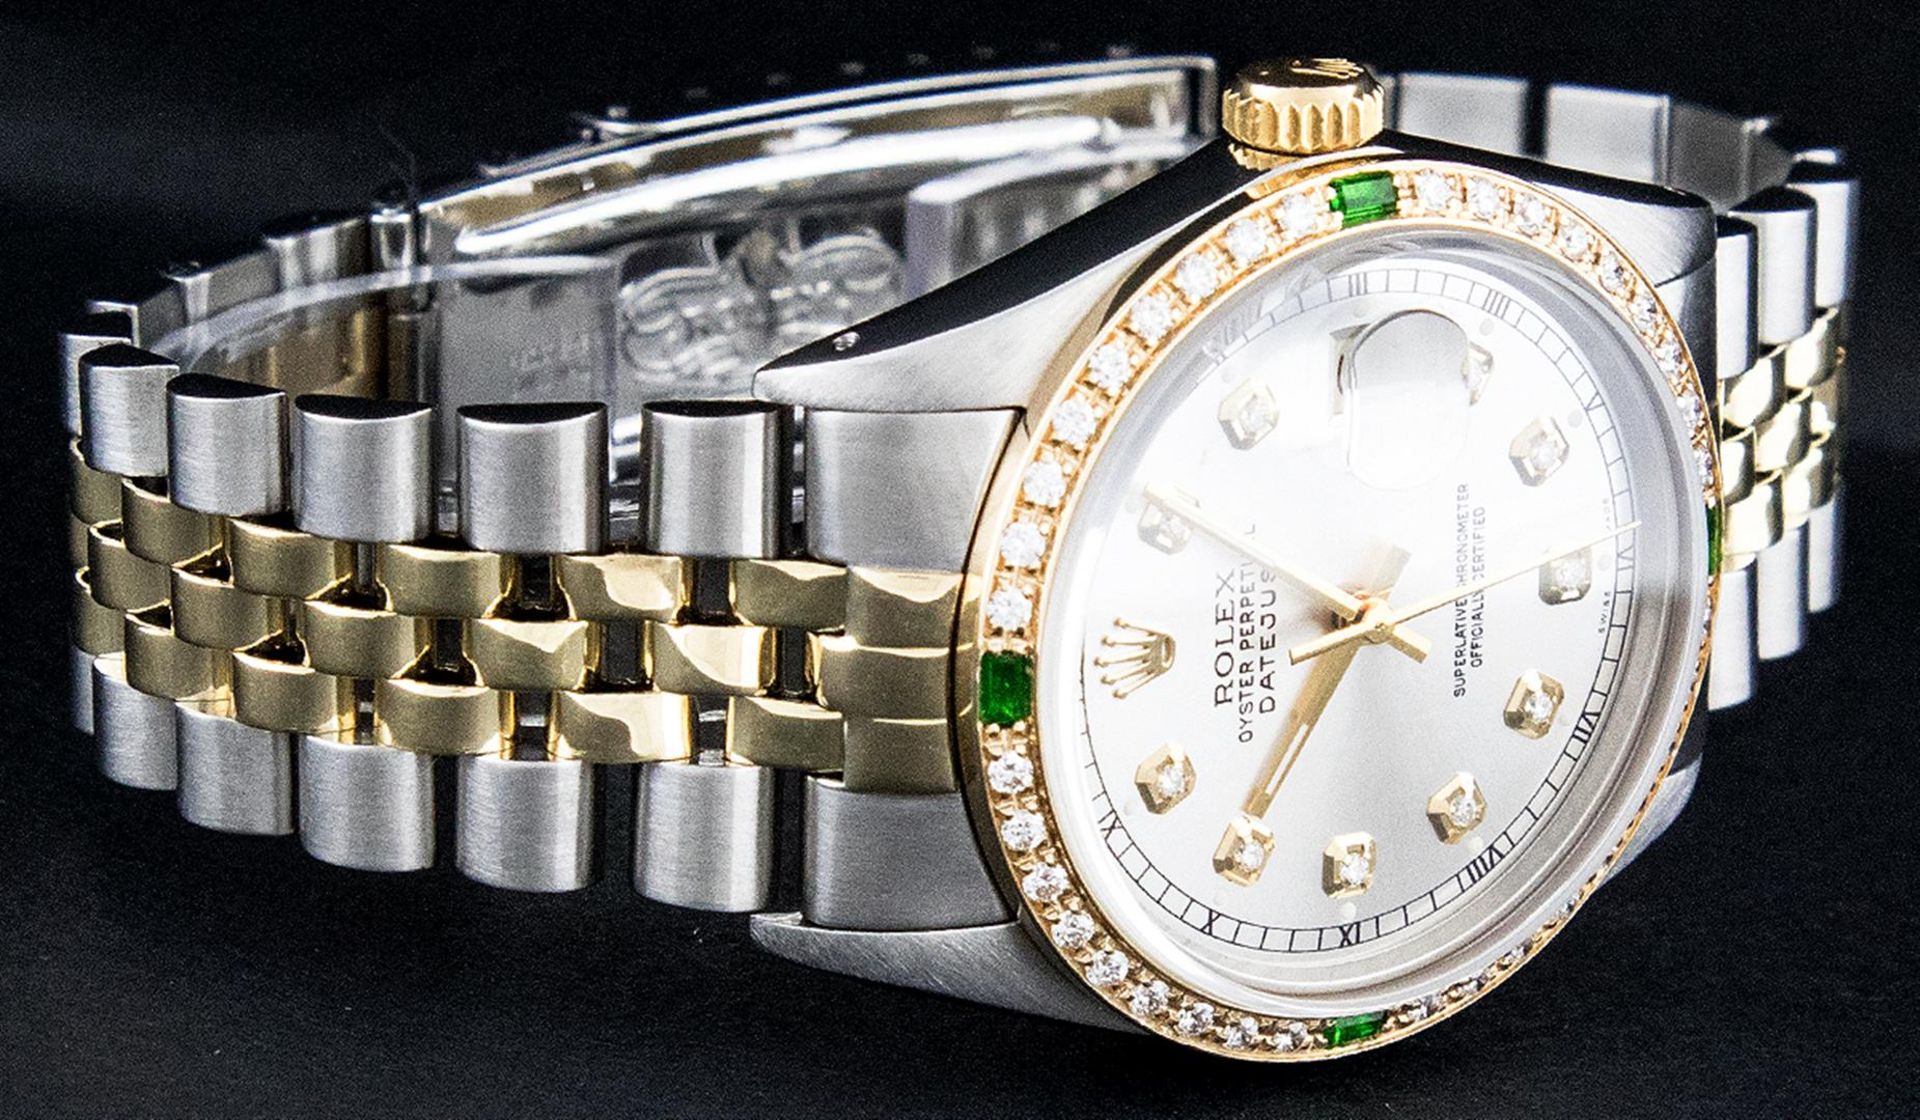 Rolex Mens 2 Tone Silver & Emerald Diamond 36 Oyster Perpetual Datejust Wriswatc - Image 4 of 9